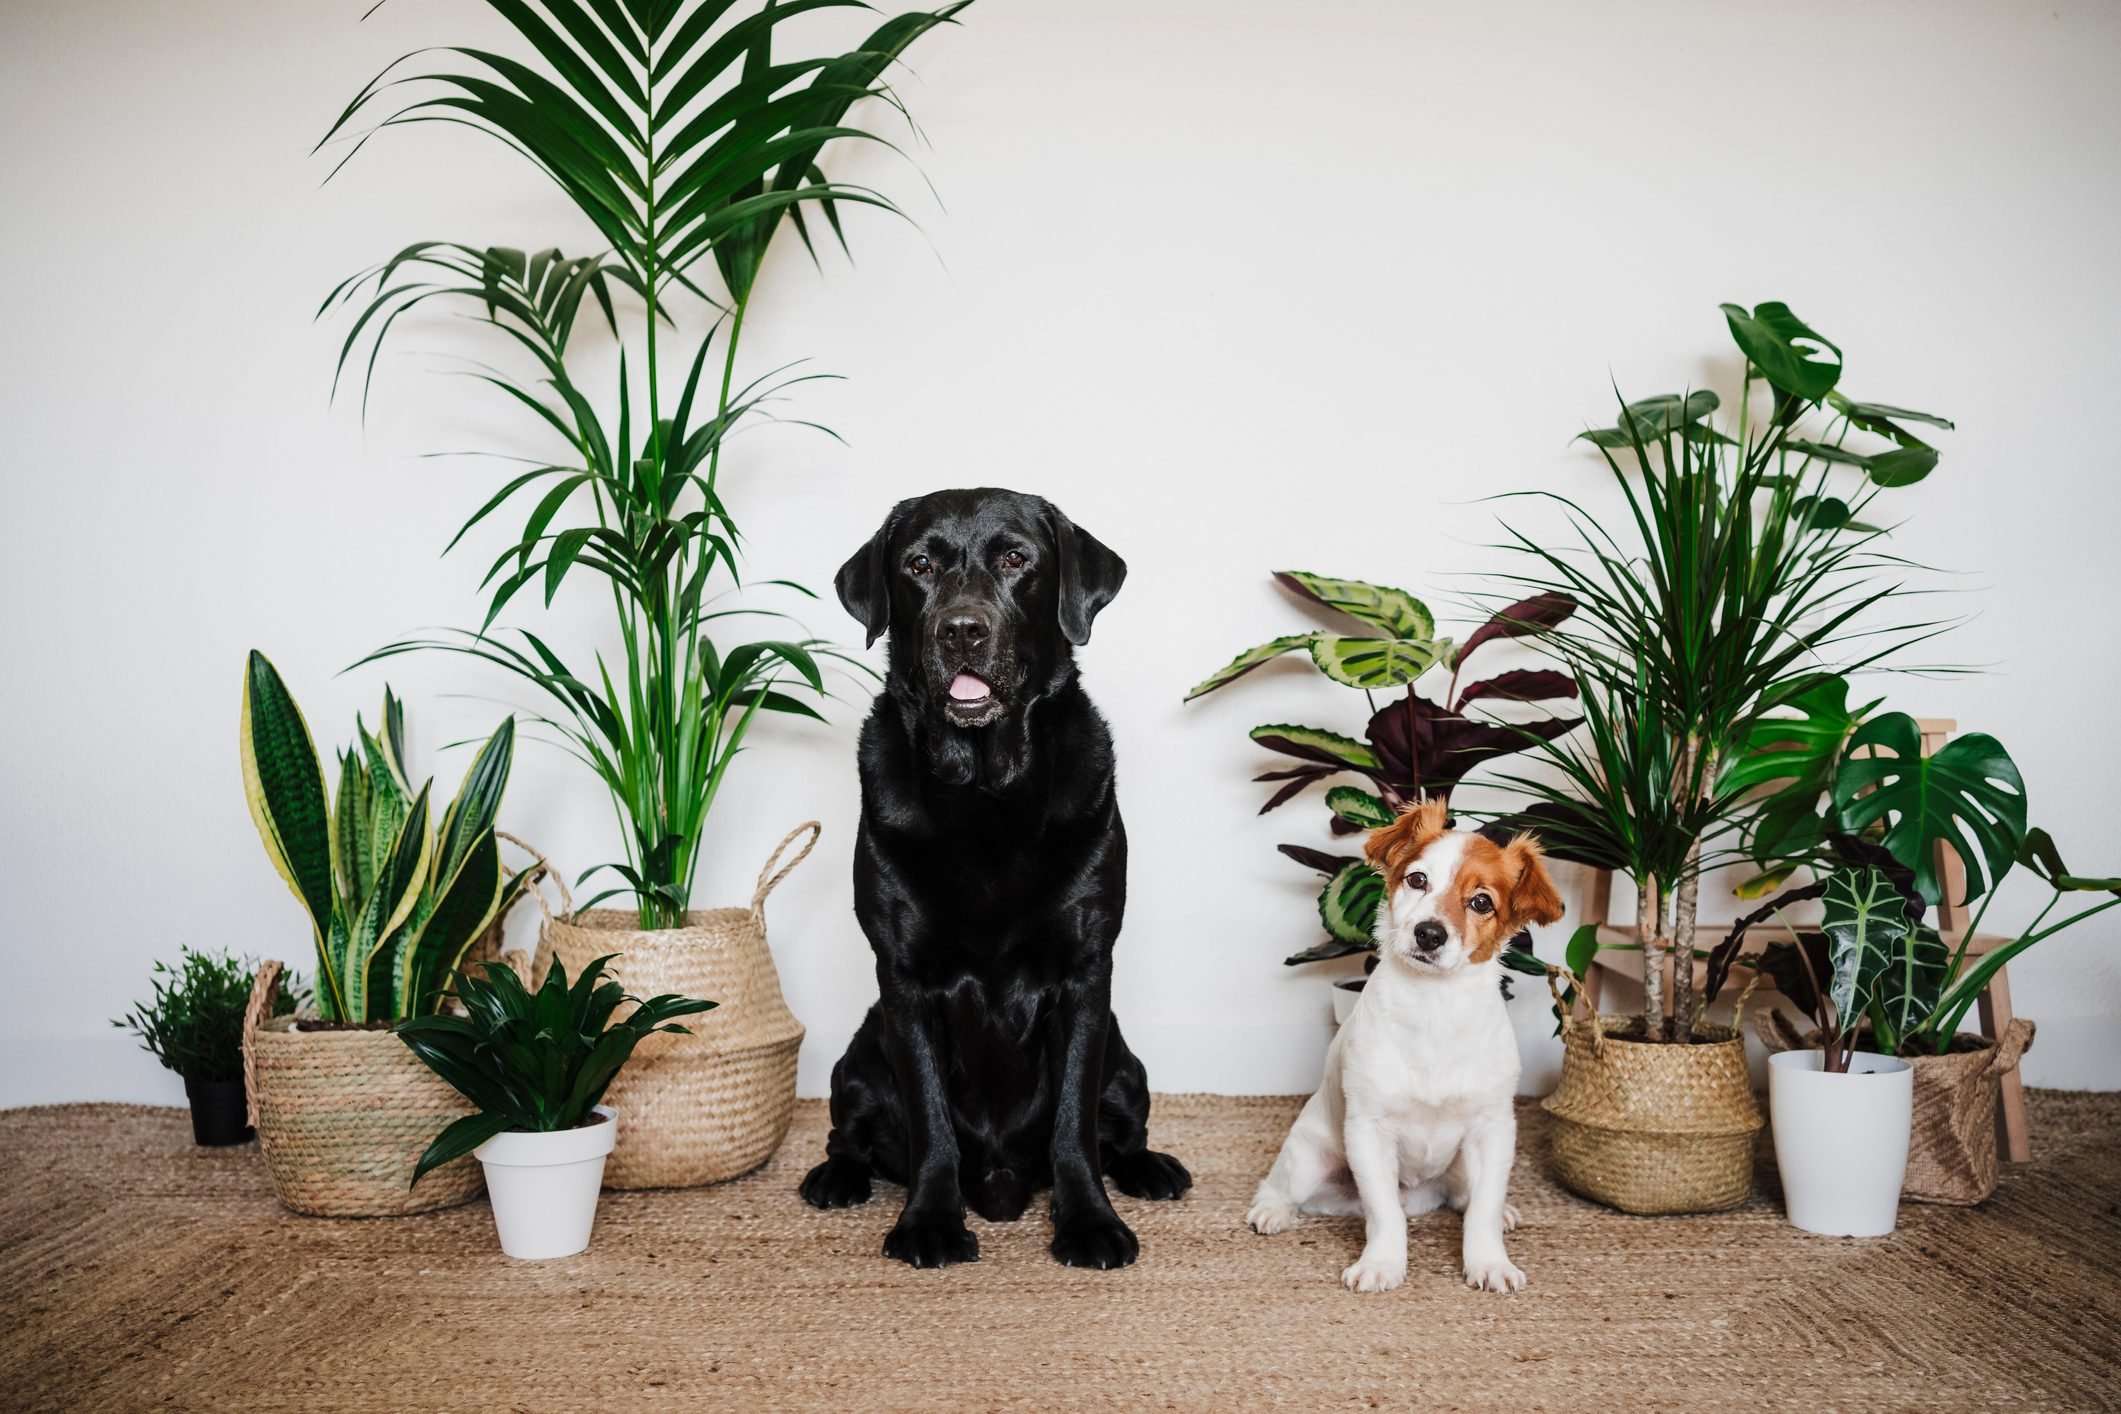 Plants That Are Poisonous To Dogs